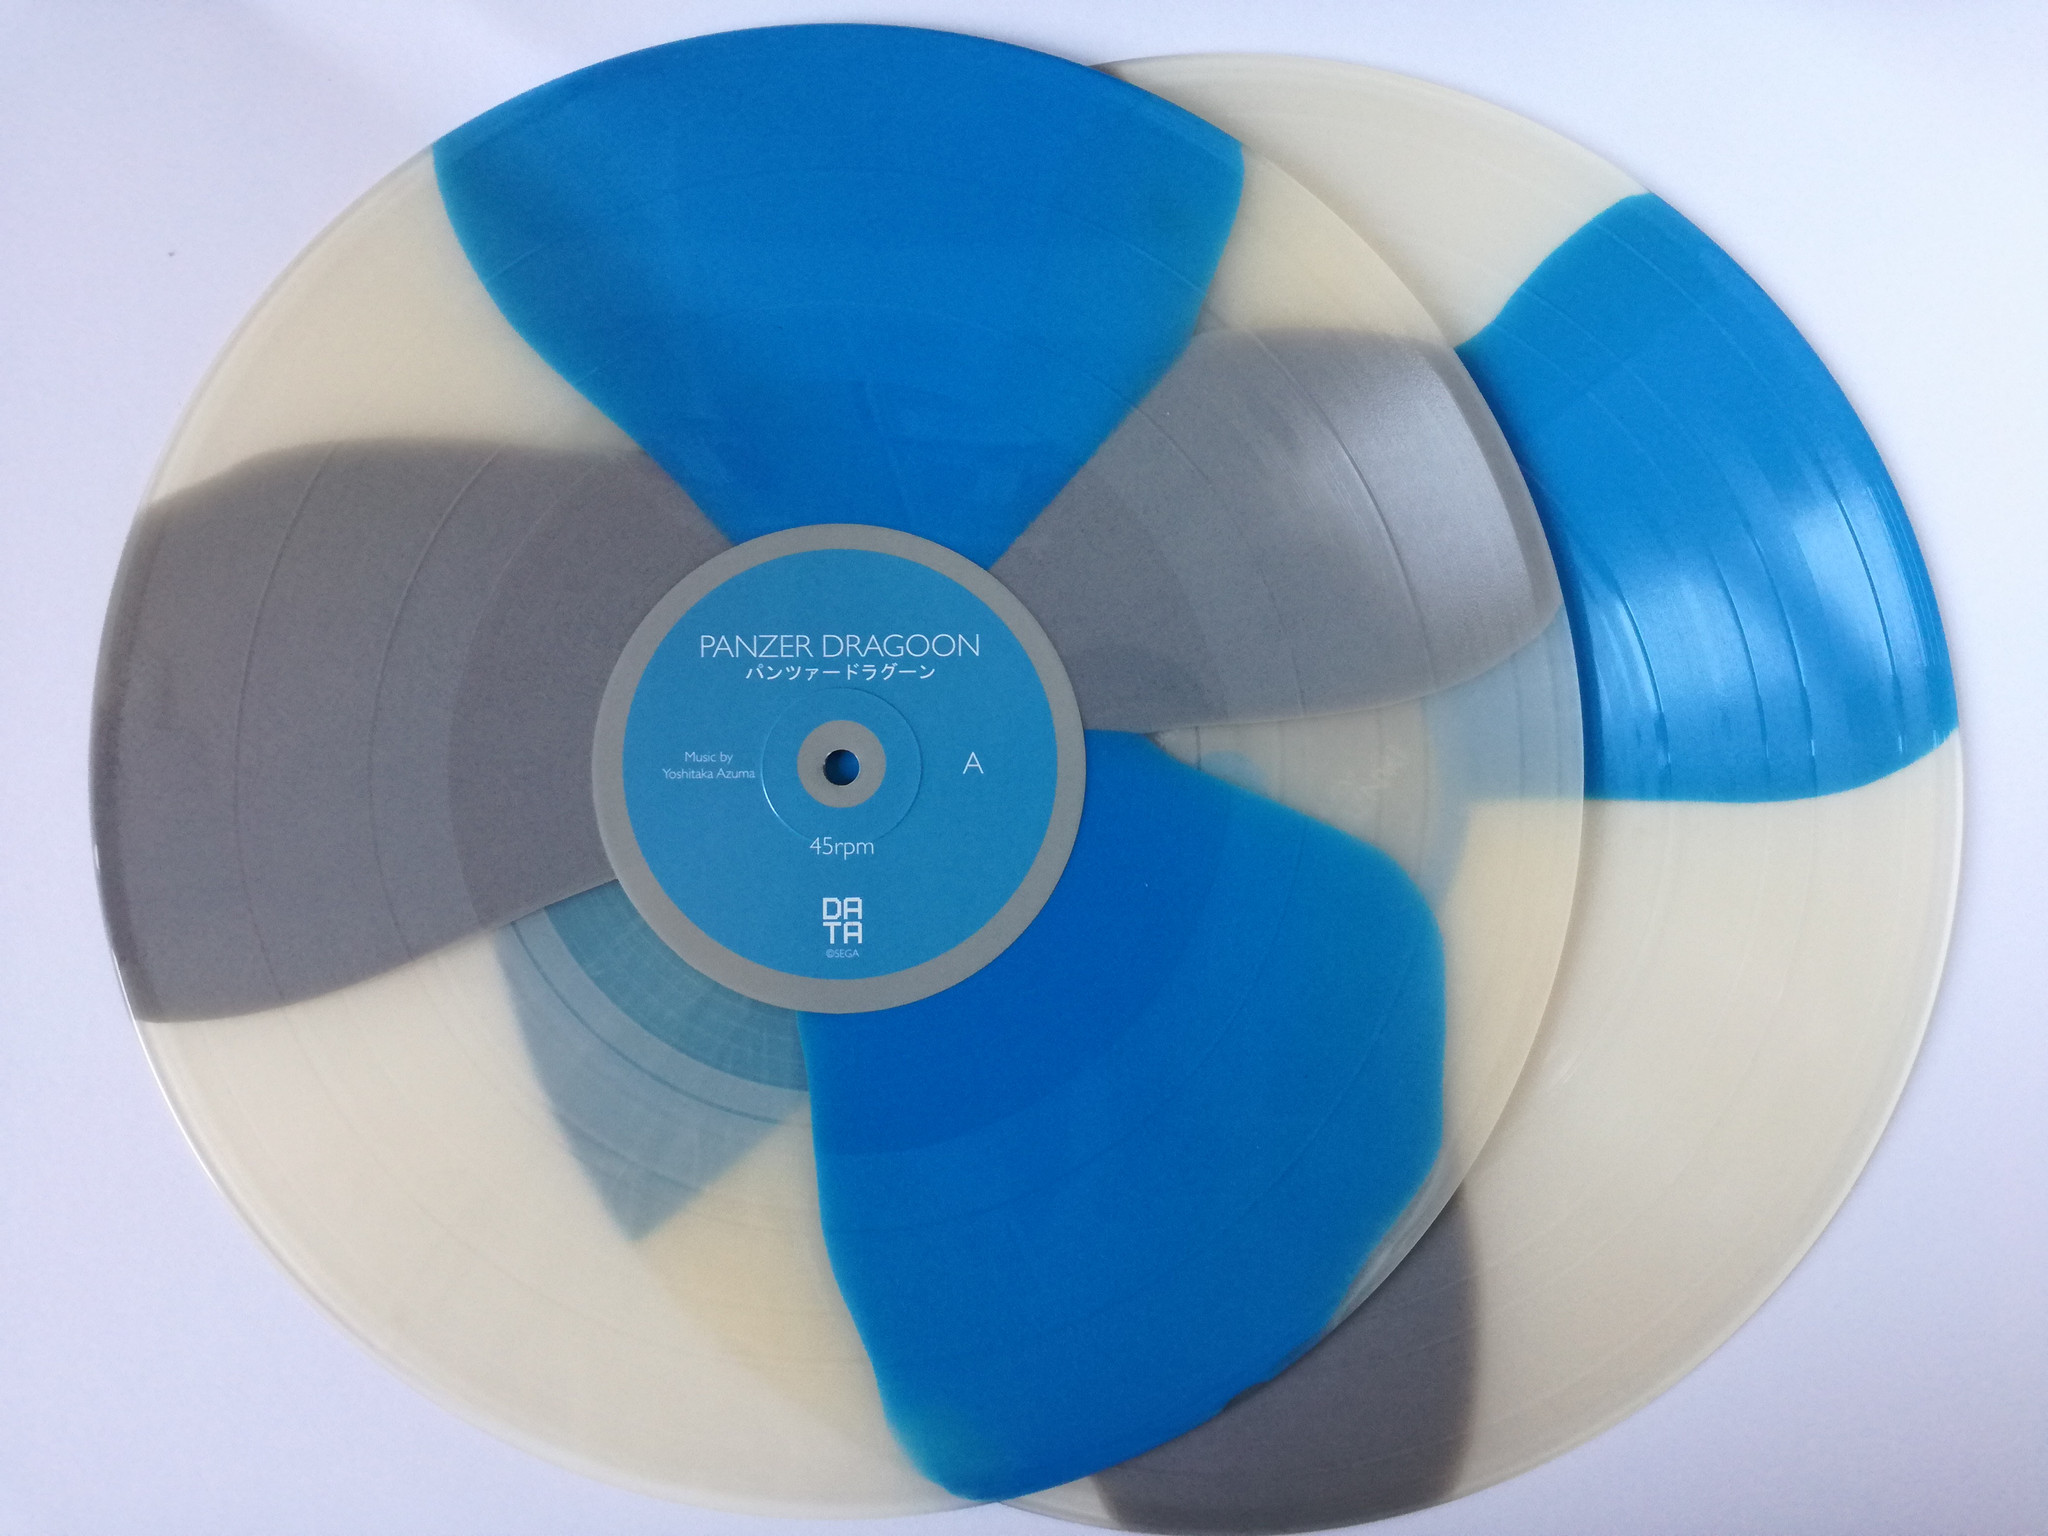 Panzer Dragoon Vinyl to be Released on Saturday